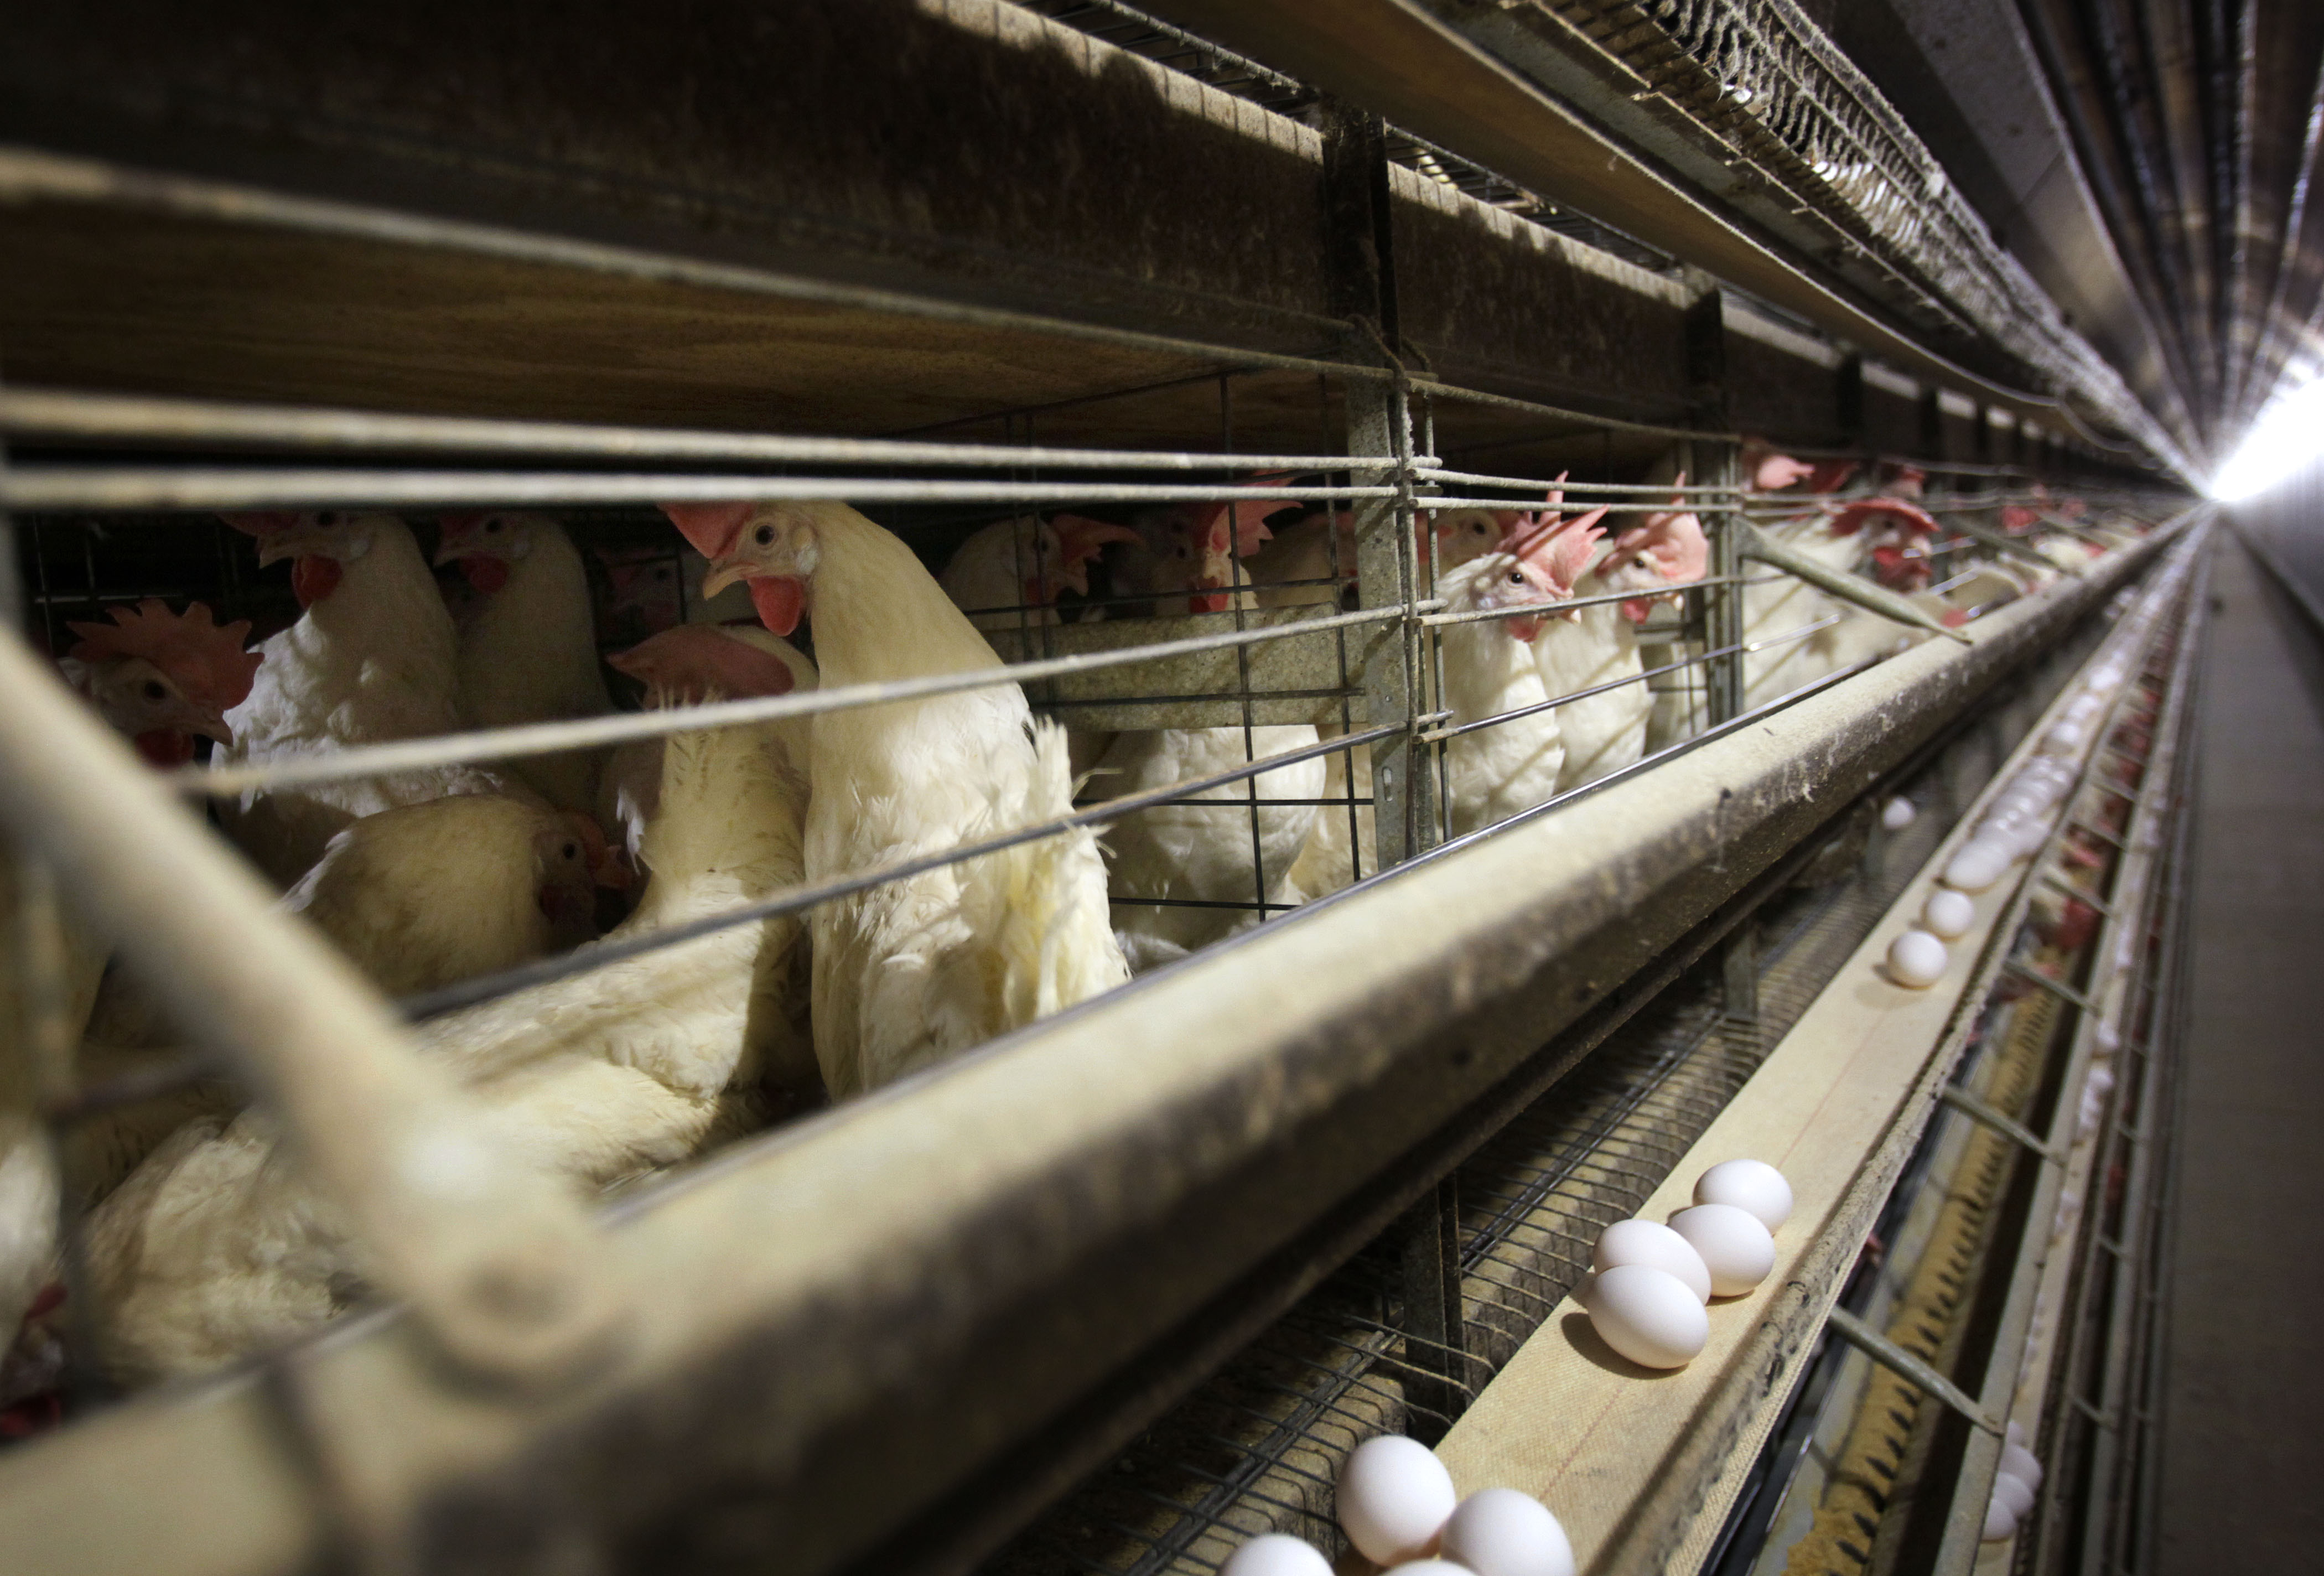 Bird flu outbreak 2 million more Minnesota chickens to be killed due